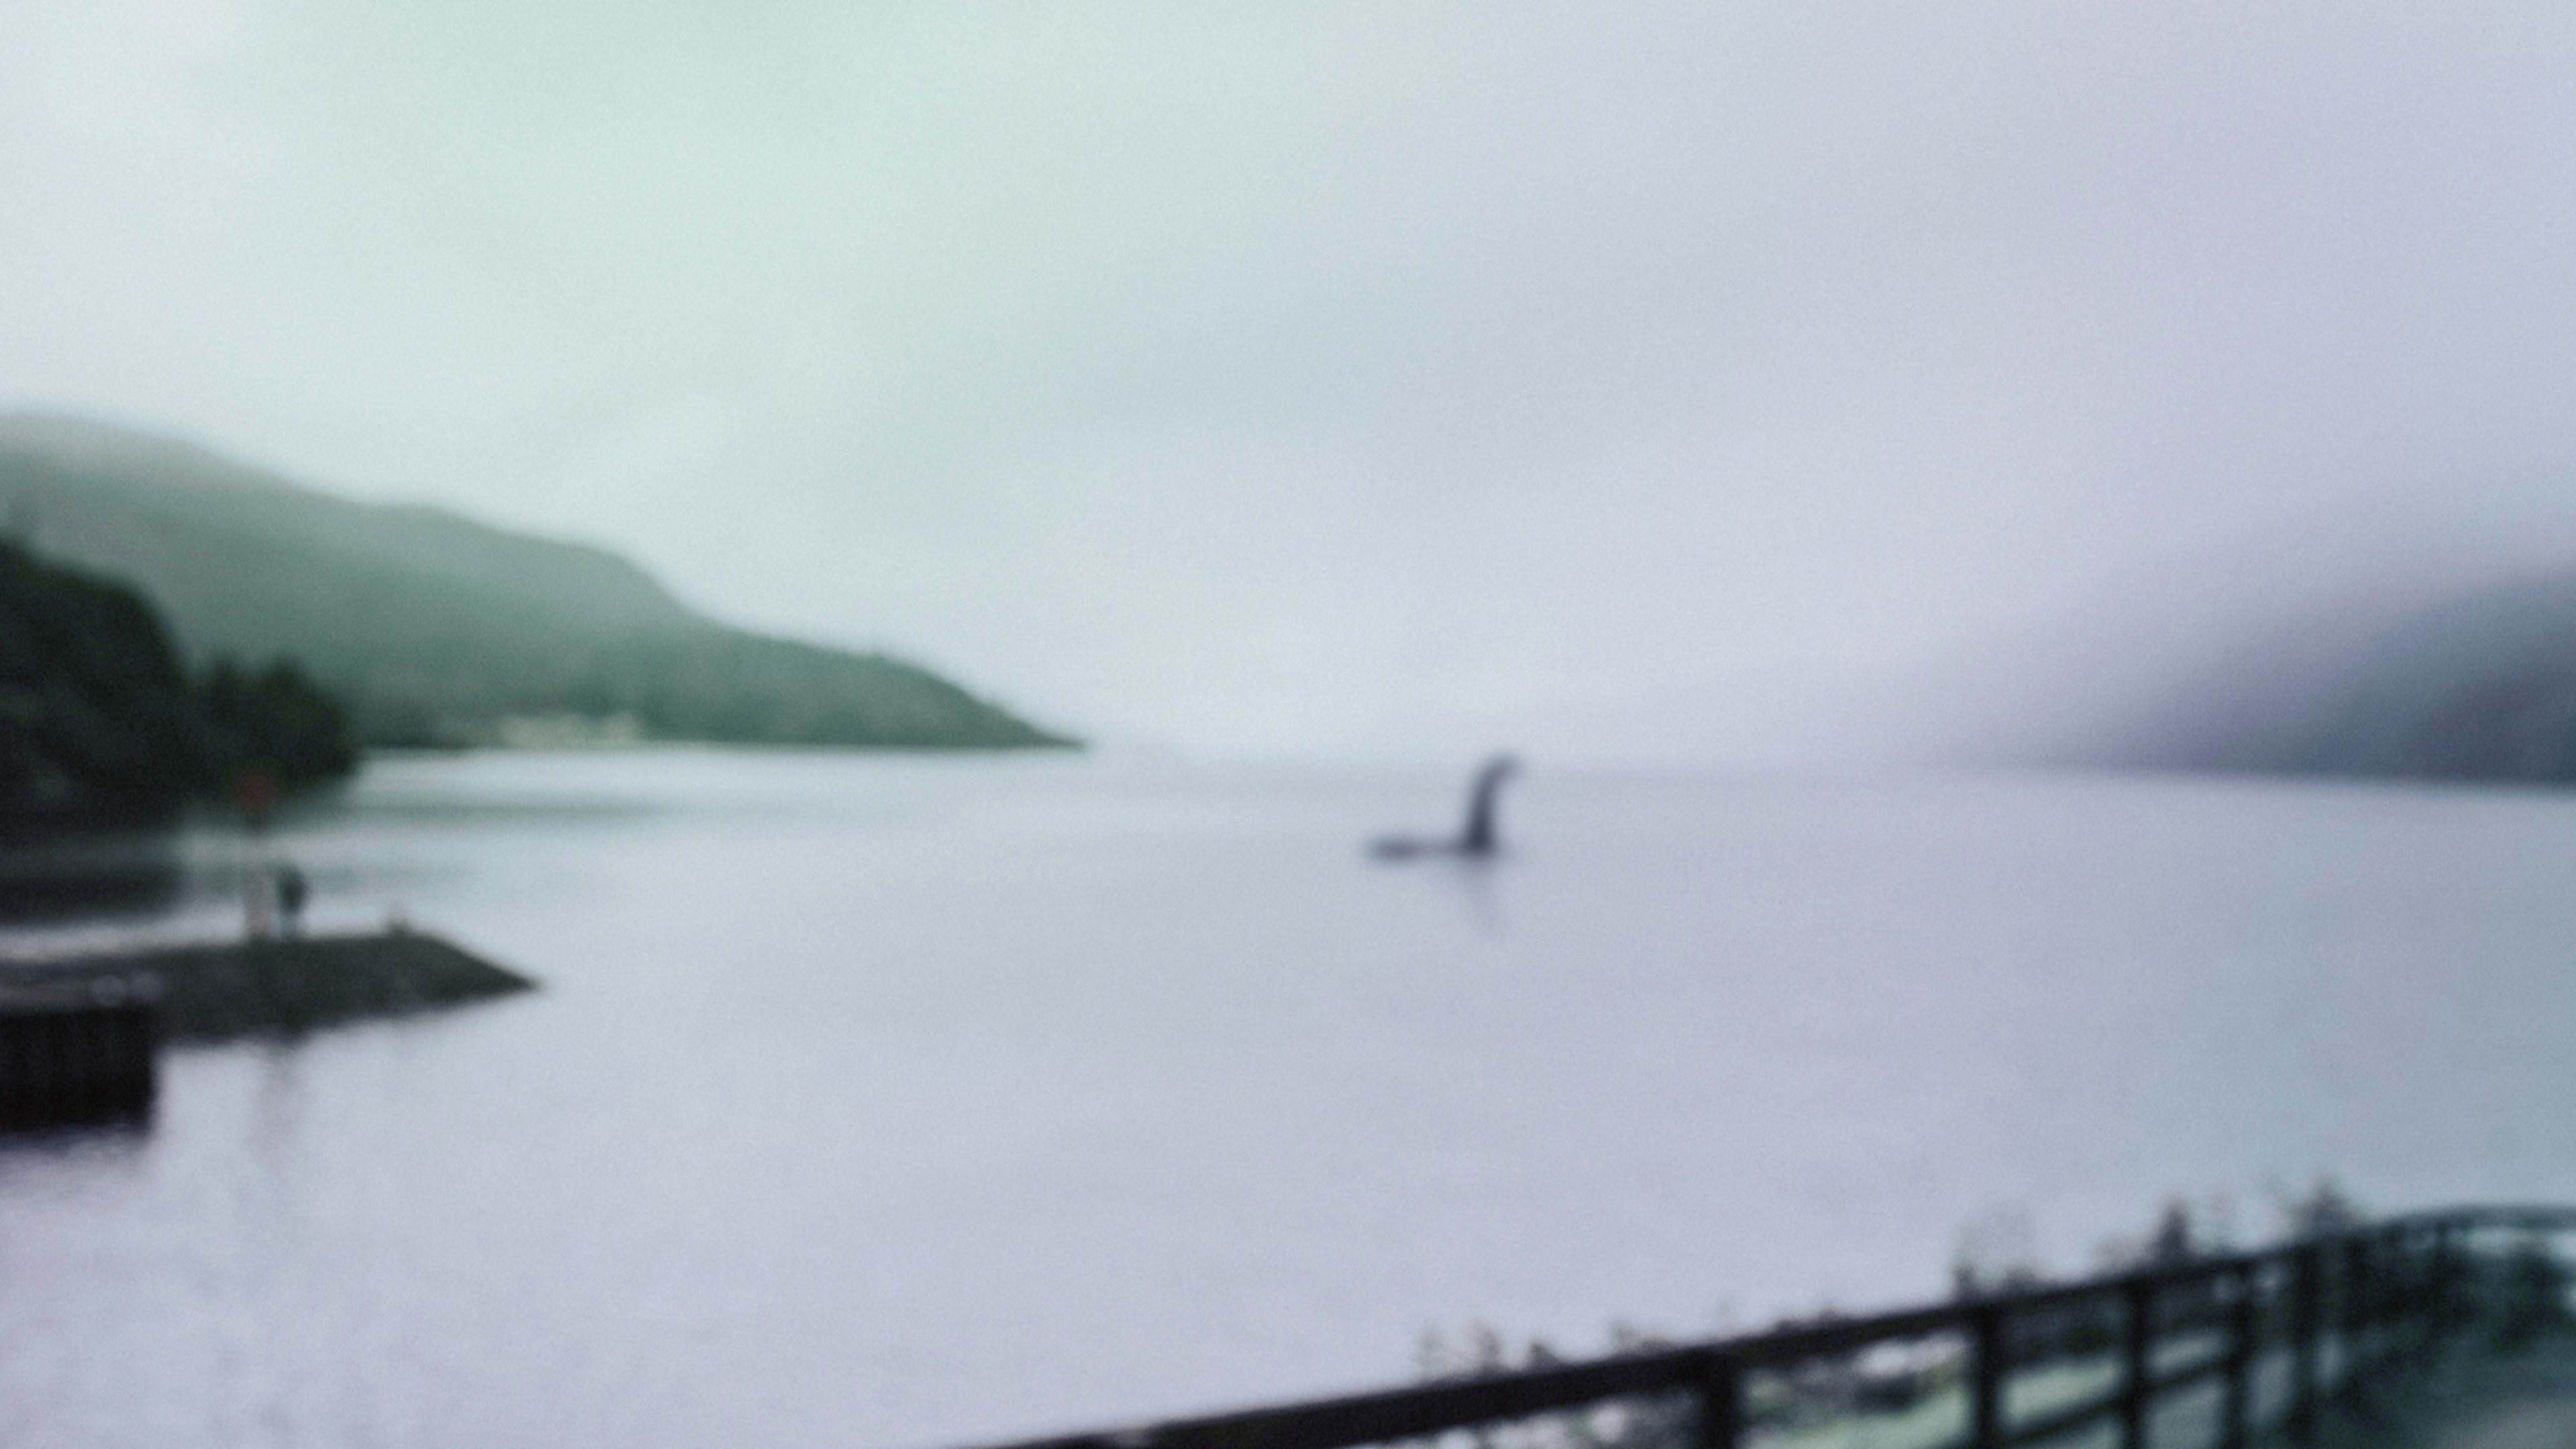 Researchers are DNA testing Loch Ness to identify the monster